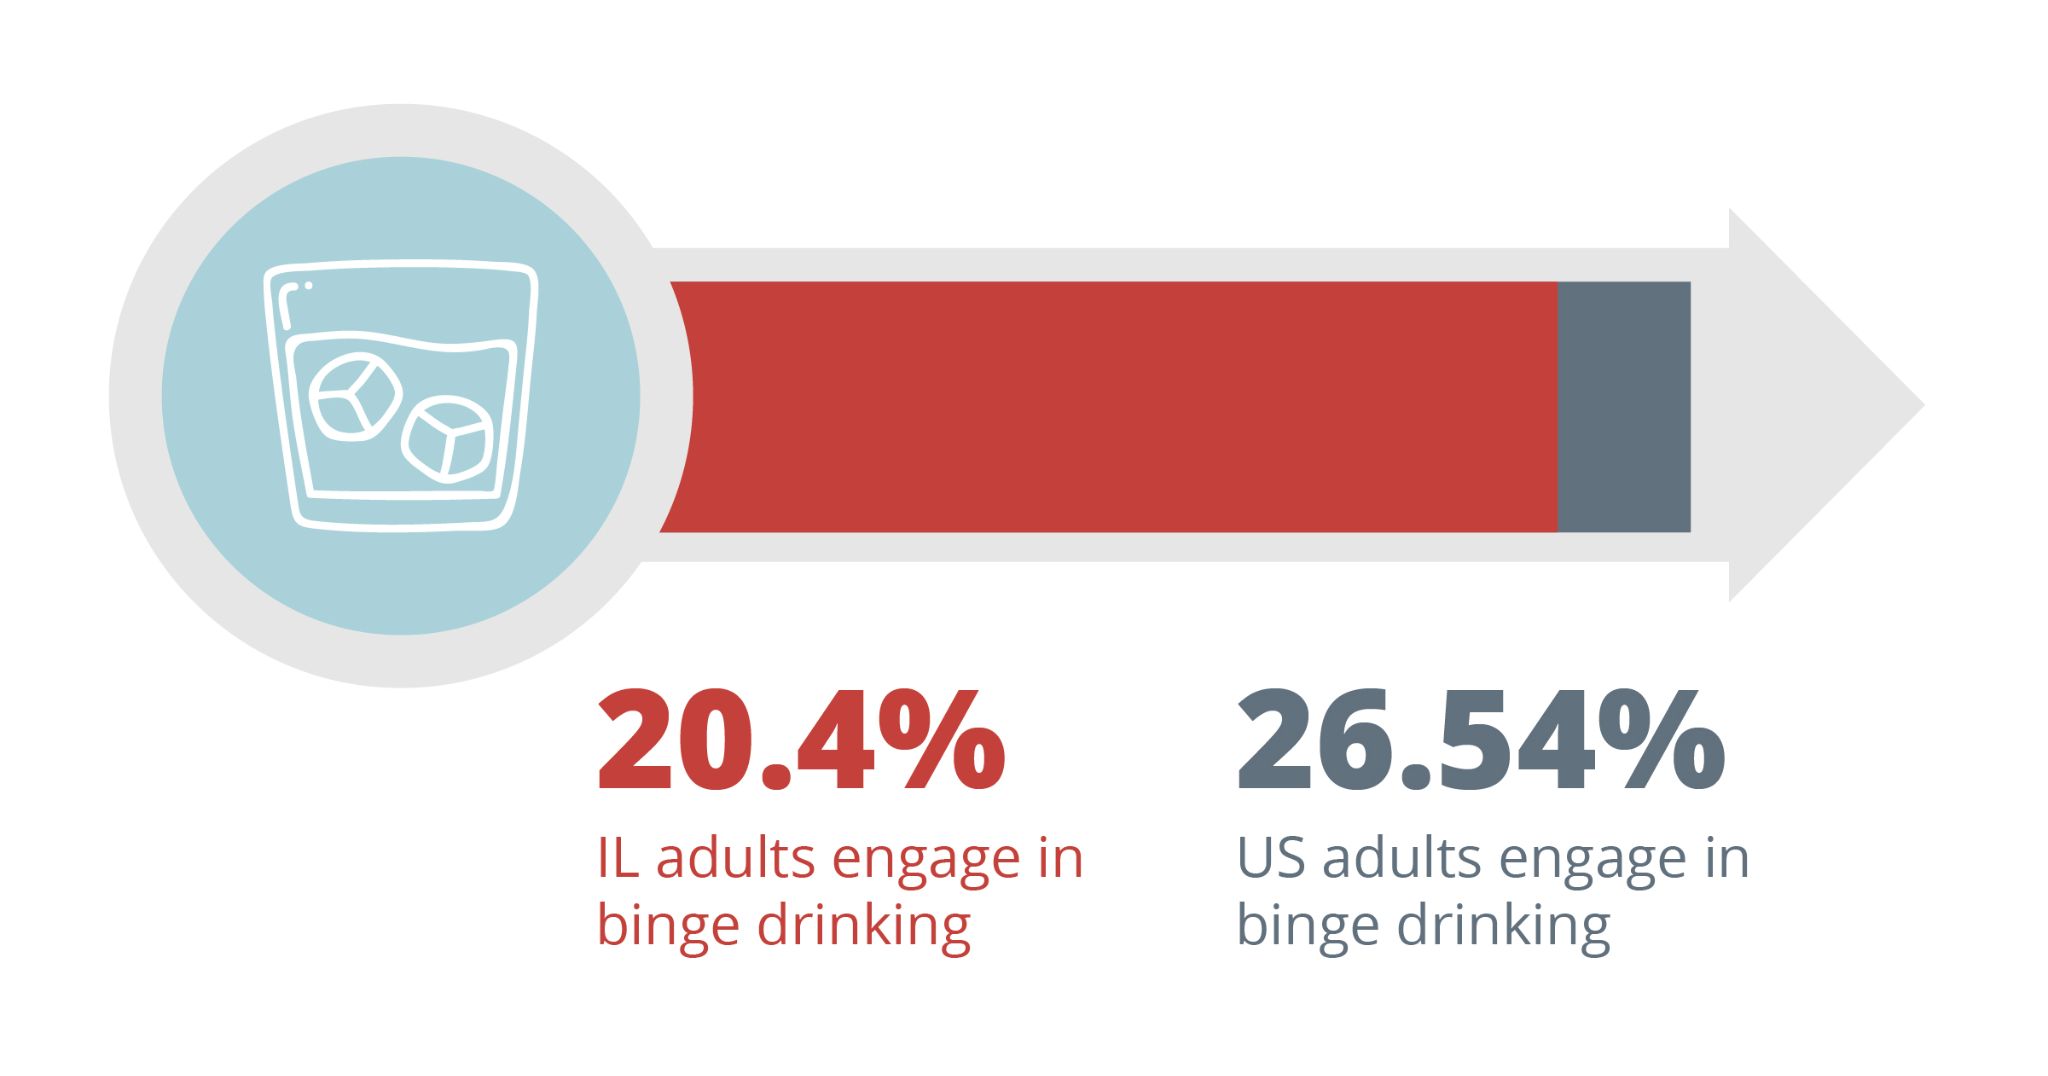 20.4% of illinois adults engage in binge drinking. 26.54% of American adults engage in binge drinking. Drug And Alcohol Detox & Rehab, Addiction Treatment Resources in Bloomington Illinois